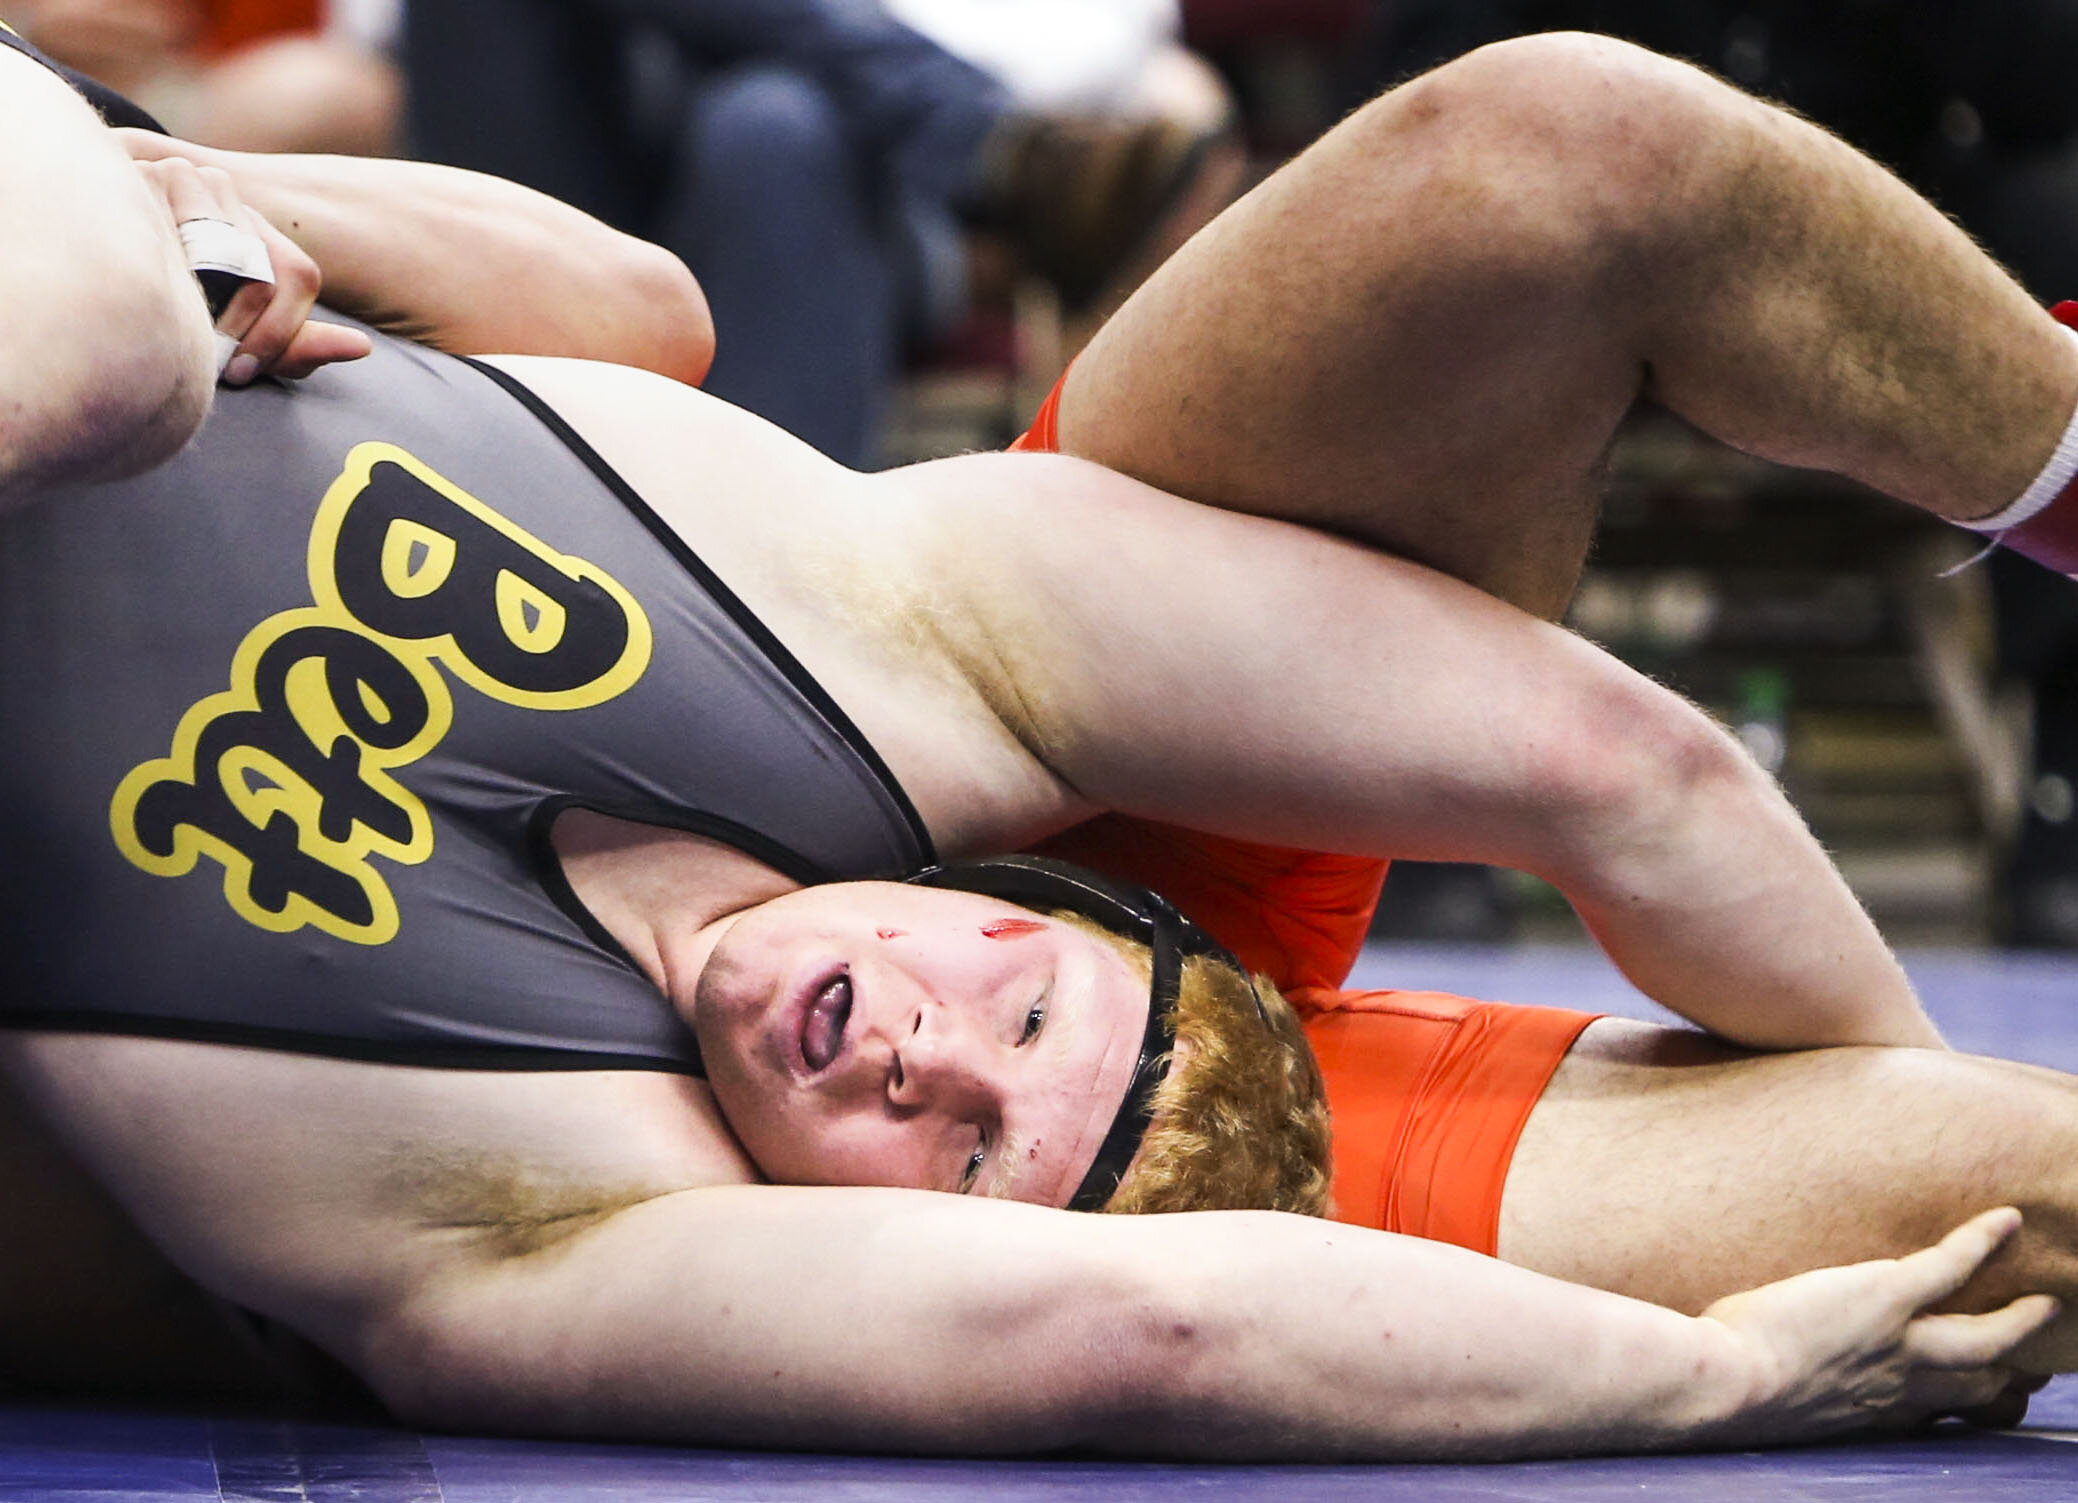  Bettendorf’s Griffin Liddle wrestles Ames’ Gabriel Greenlee in the 285 weight class during the 2021 IHSAA State Wrestling Tournament at Wells Fargo Arena in Des Moines, Iowa, Saturday, February 20, 2021. 